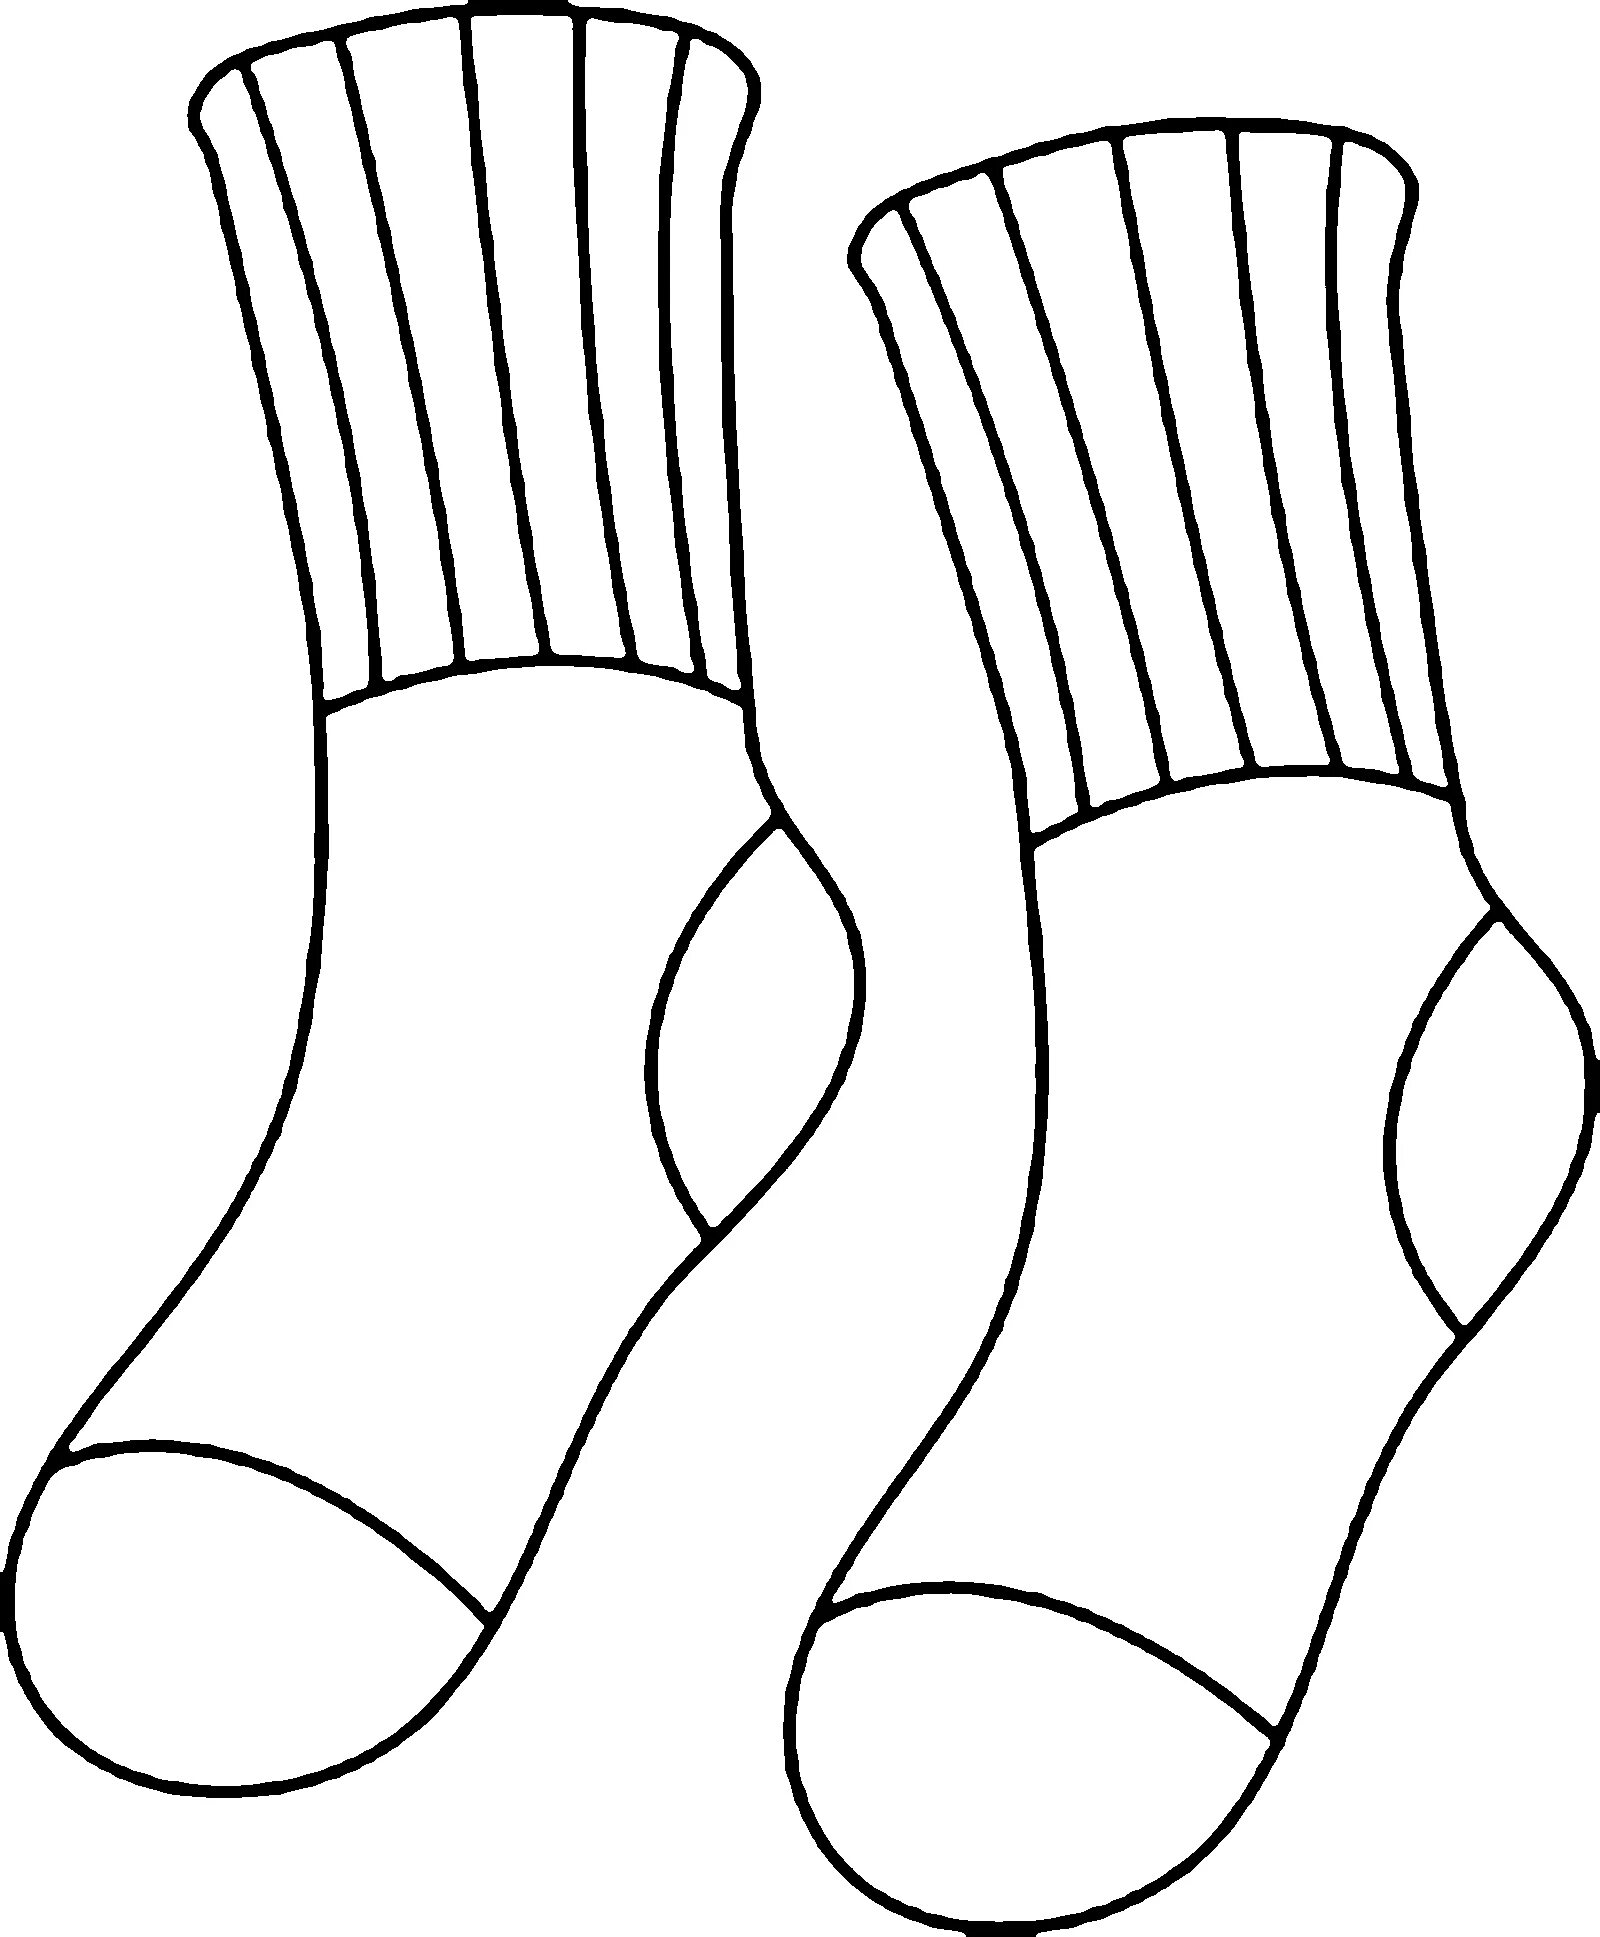 Colorful holiday socks coloring for preschoolers